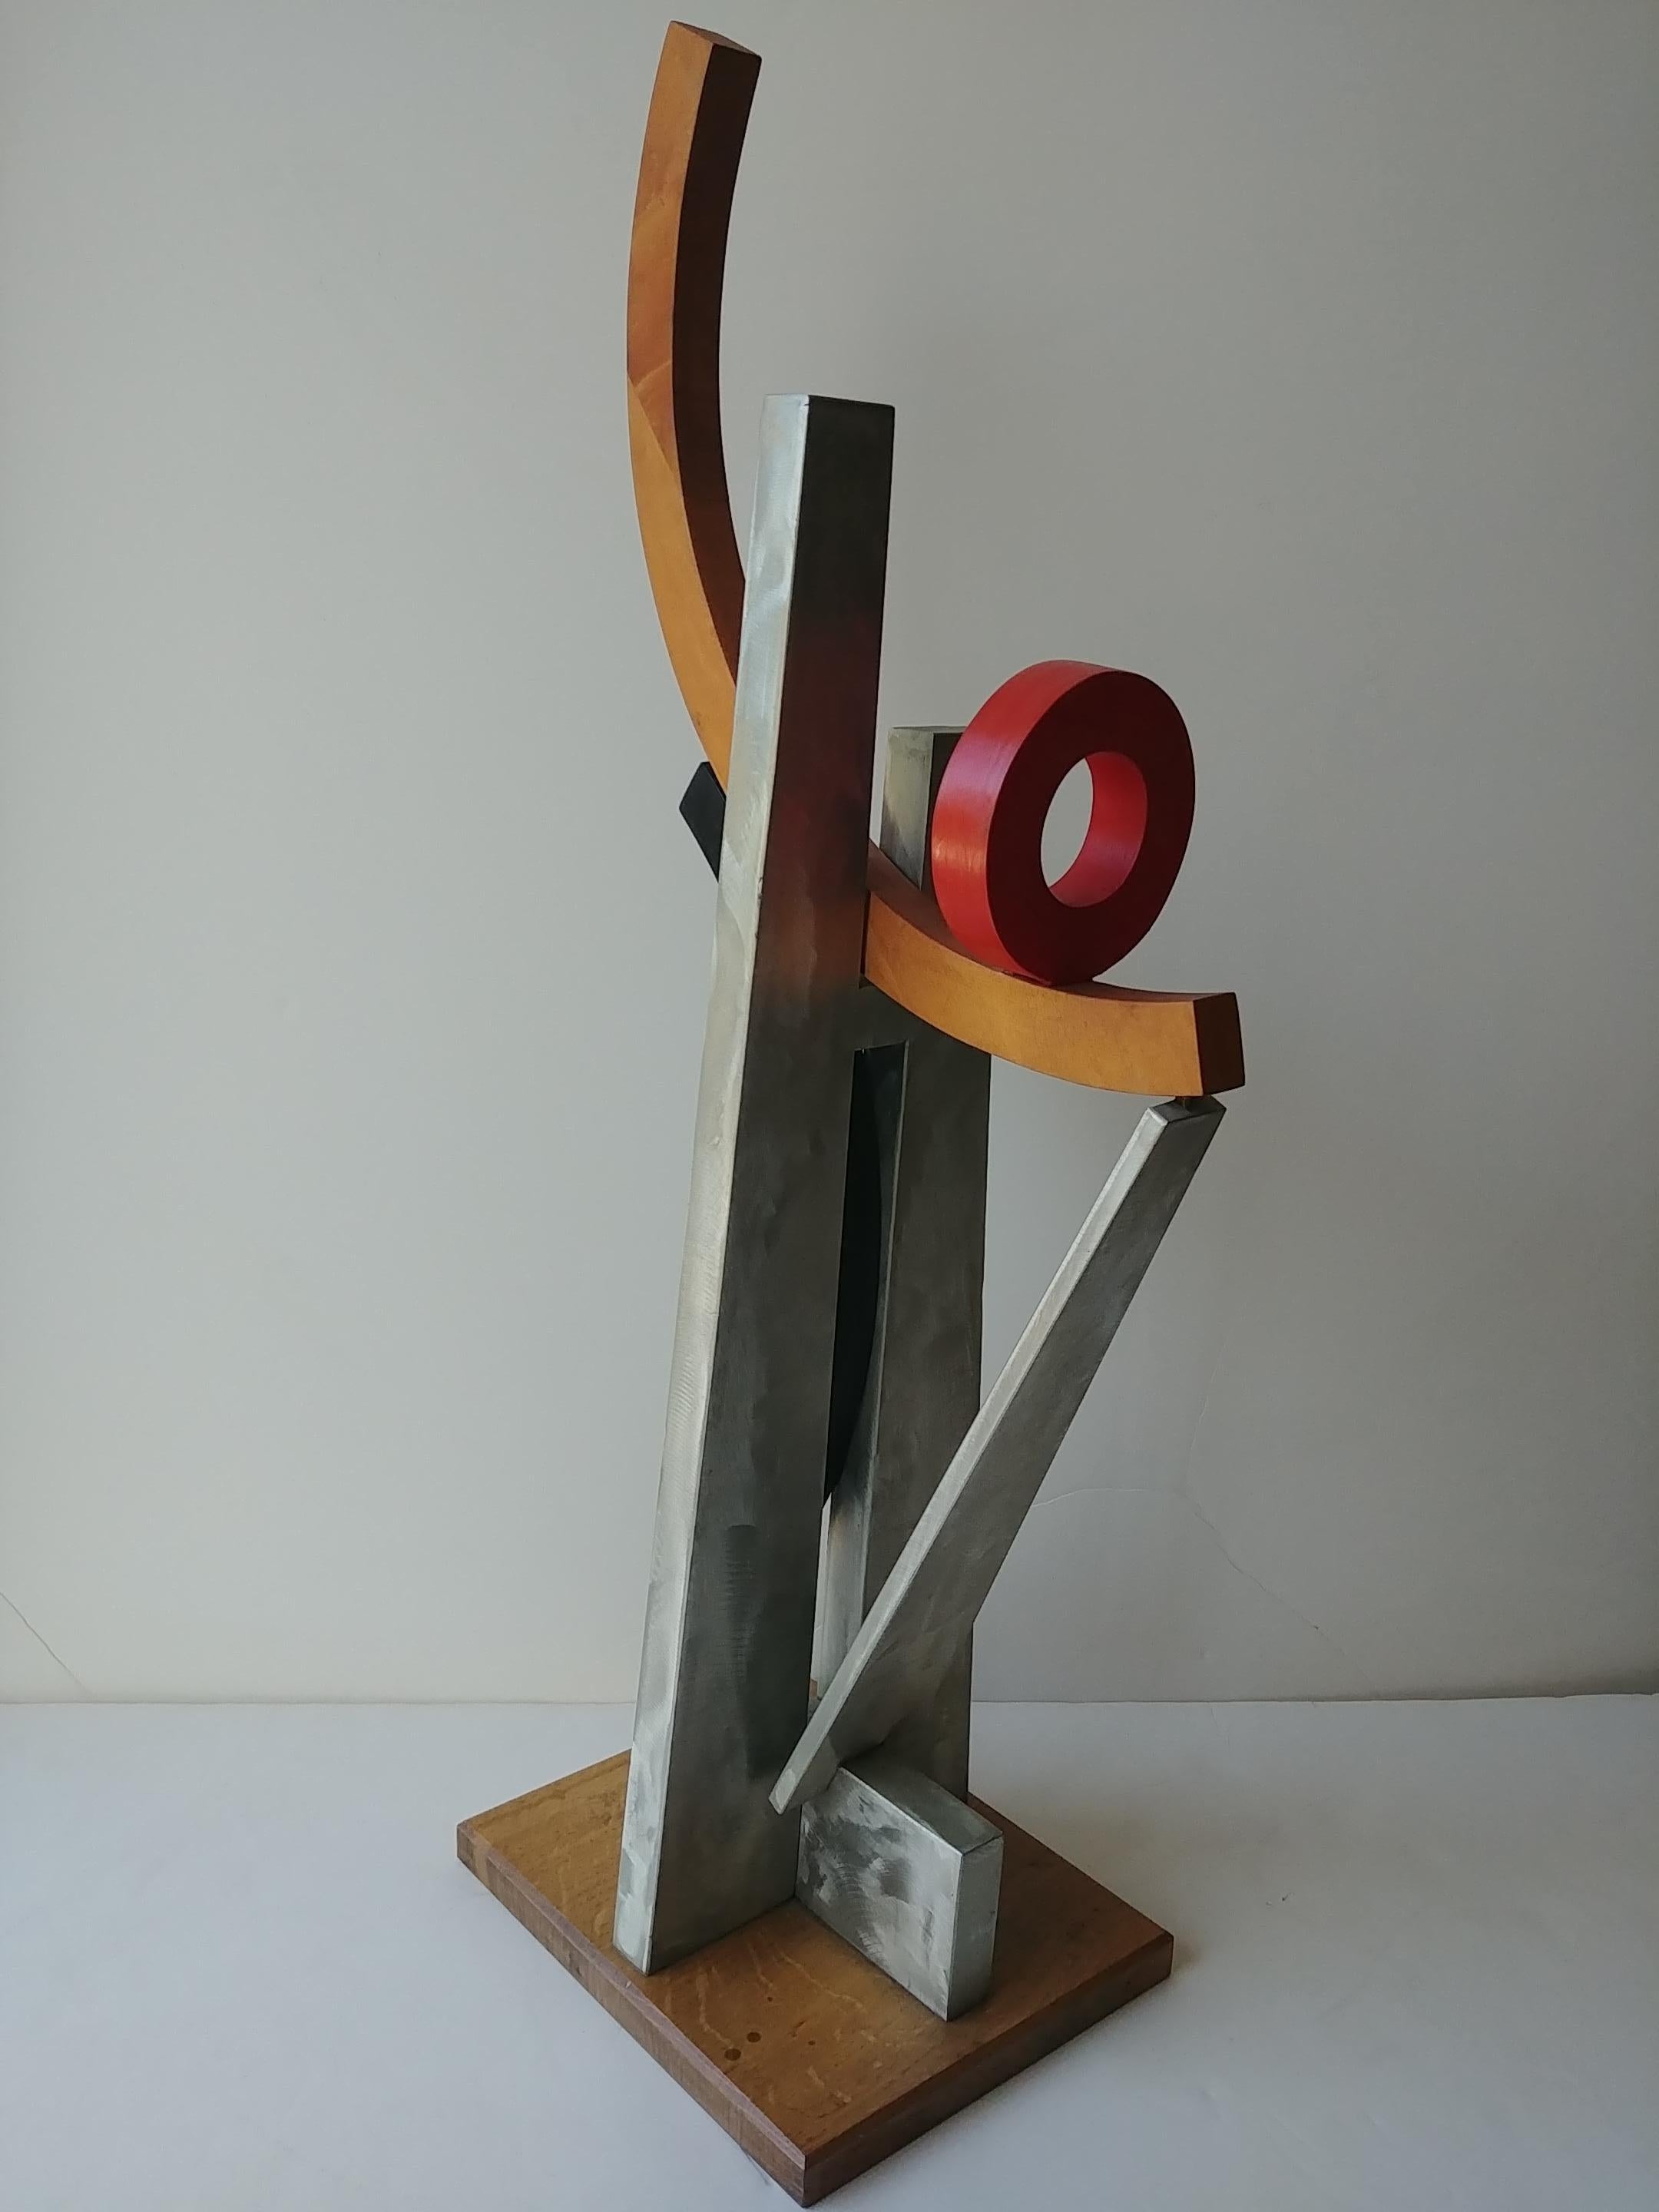 Very nice abstract sculpture by the known artist John Okulick.